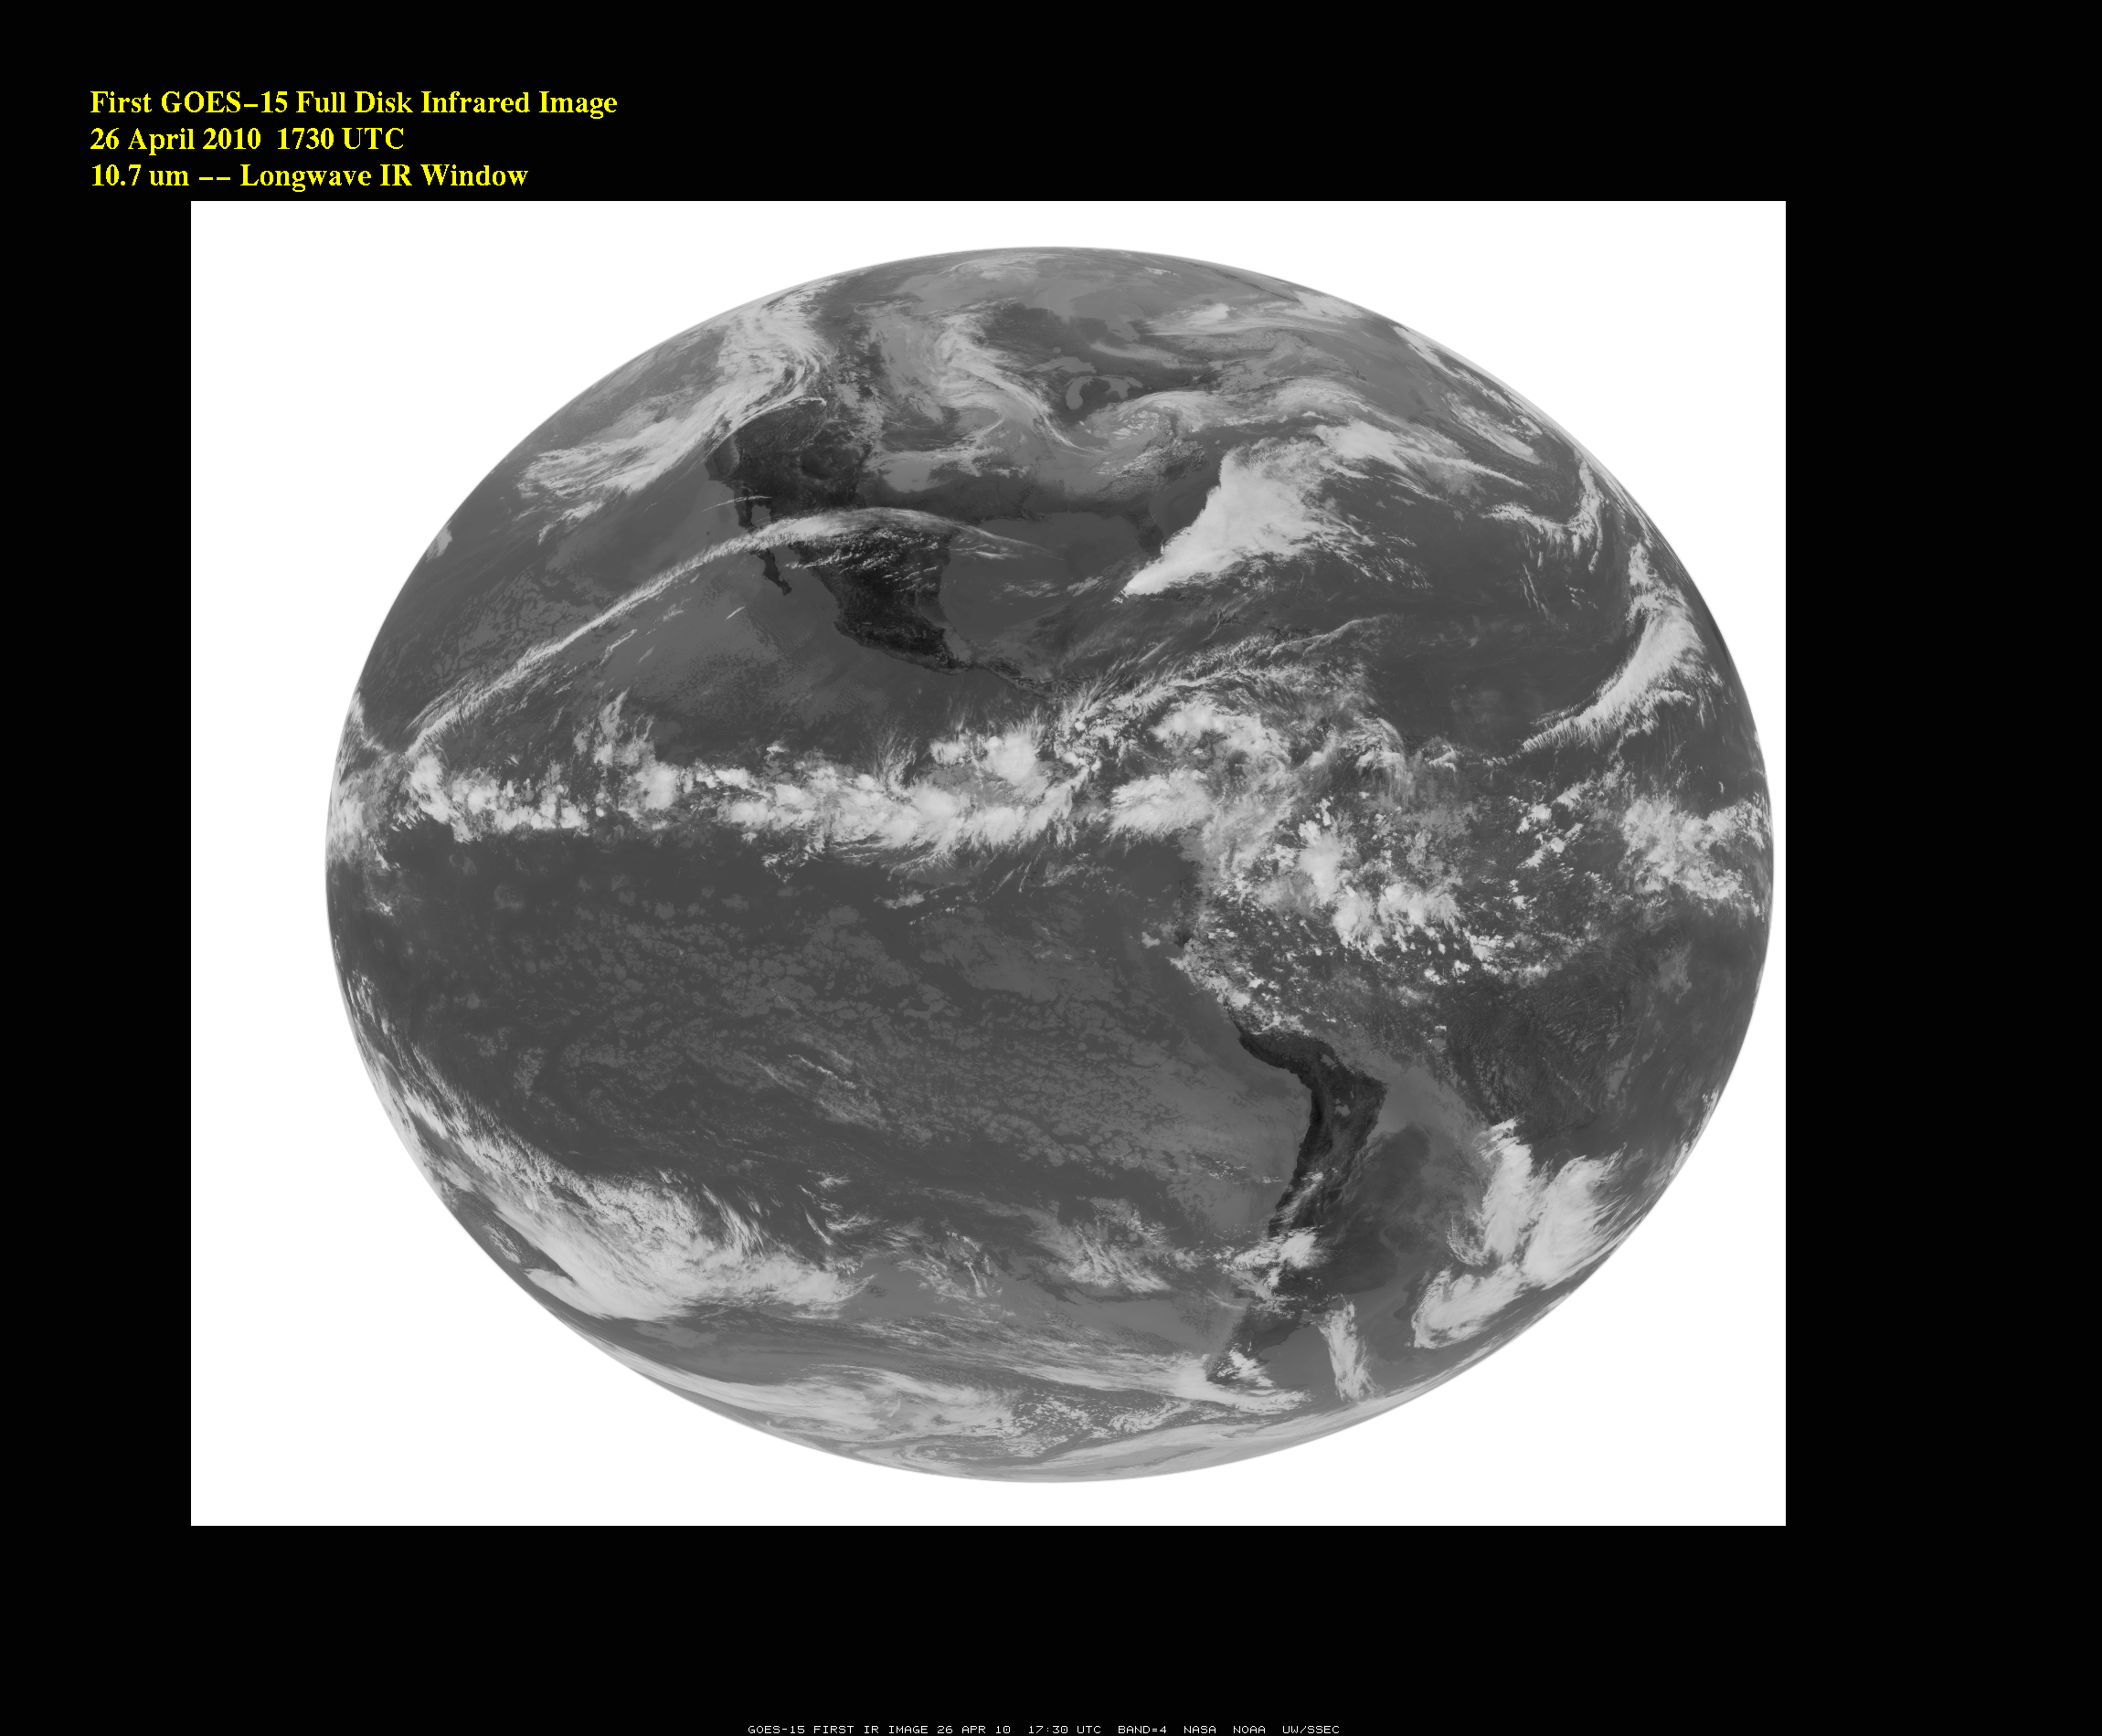 First official GOES-15 10.7 Âµm longwave IR image (click image to enlarge)